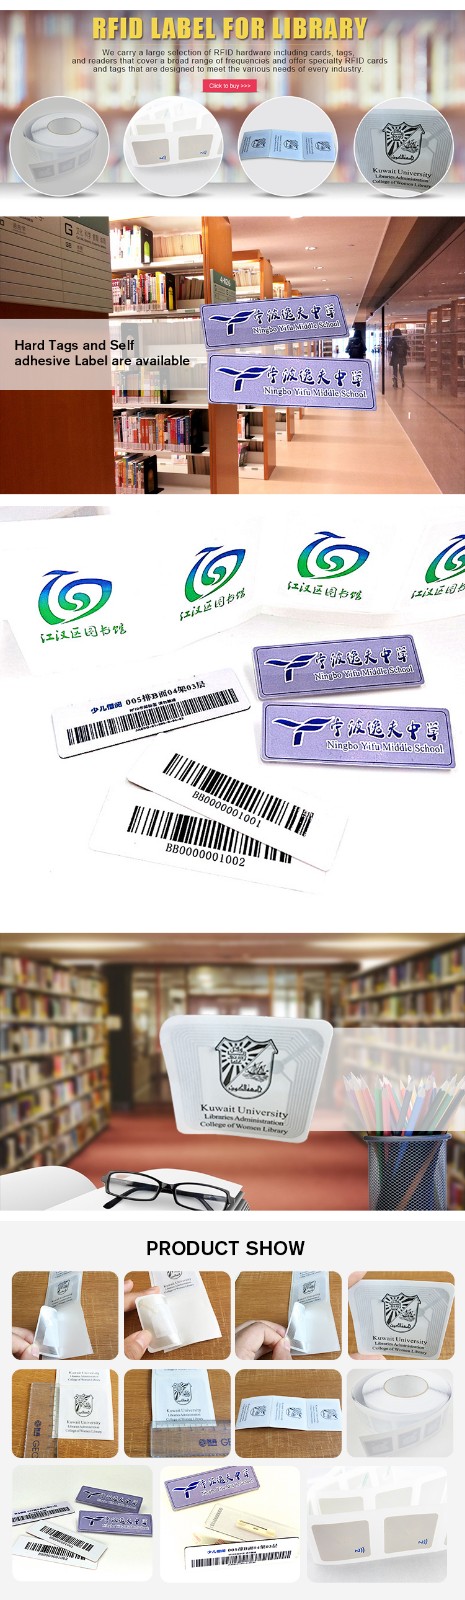 24.RFID label for library.jpg